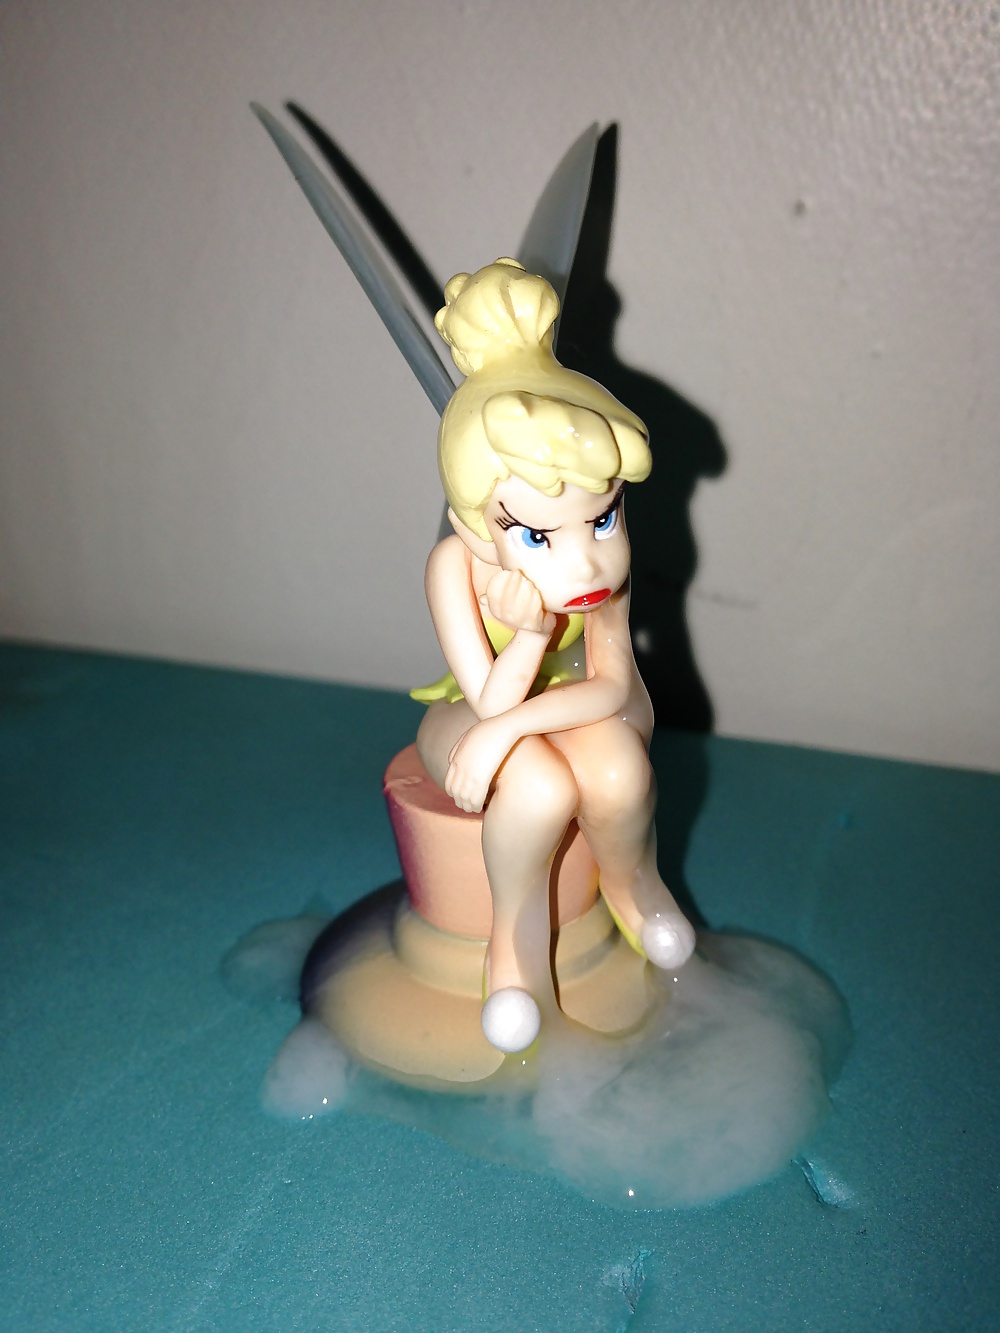 Sassy Tinkerbell  covered in cum #30168515